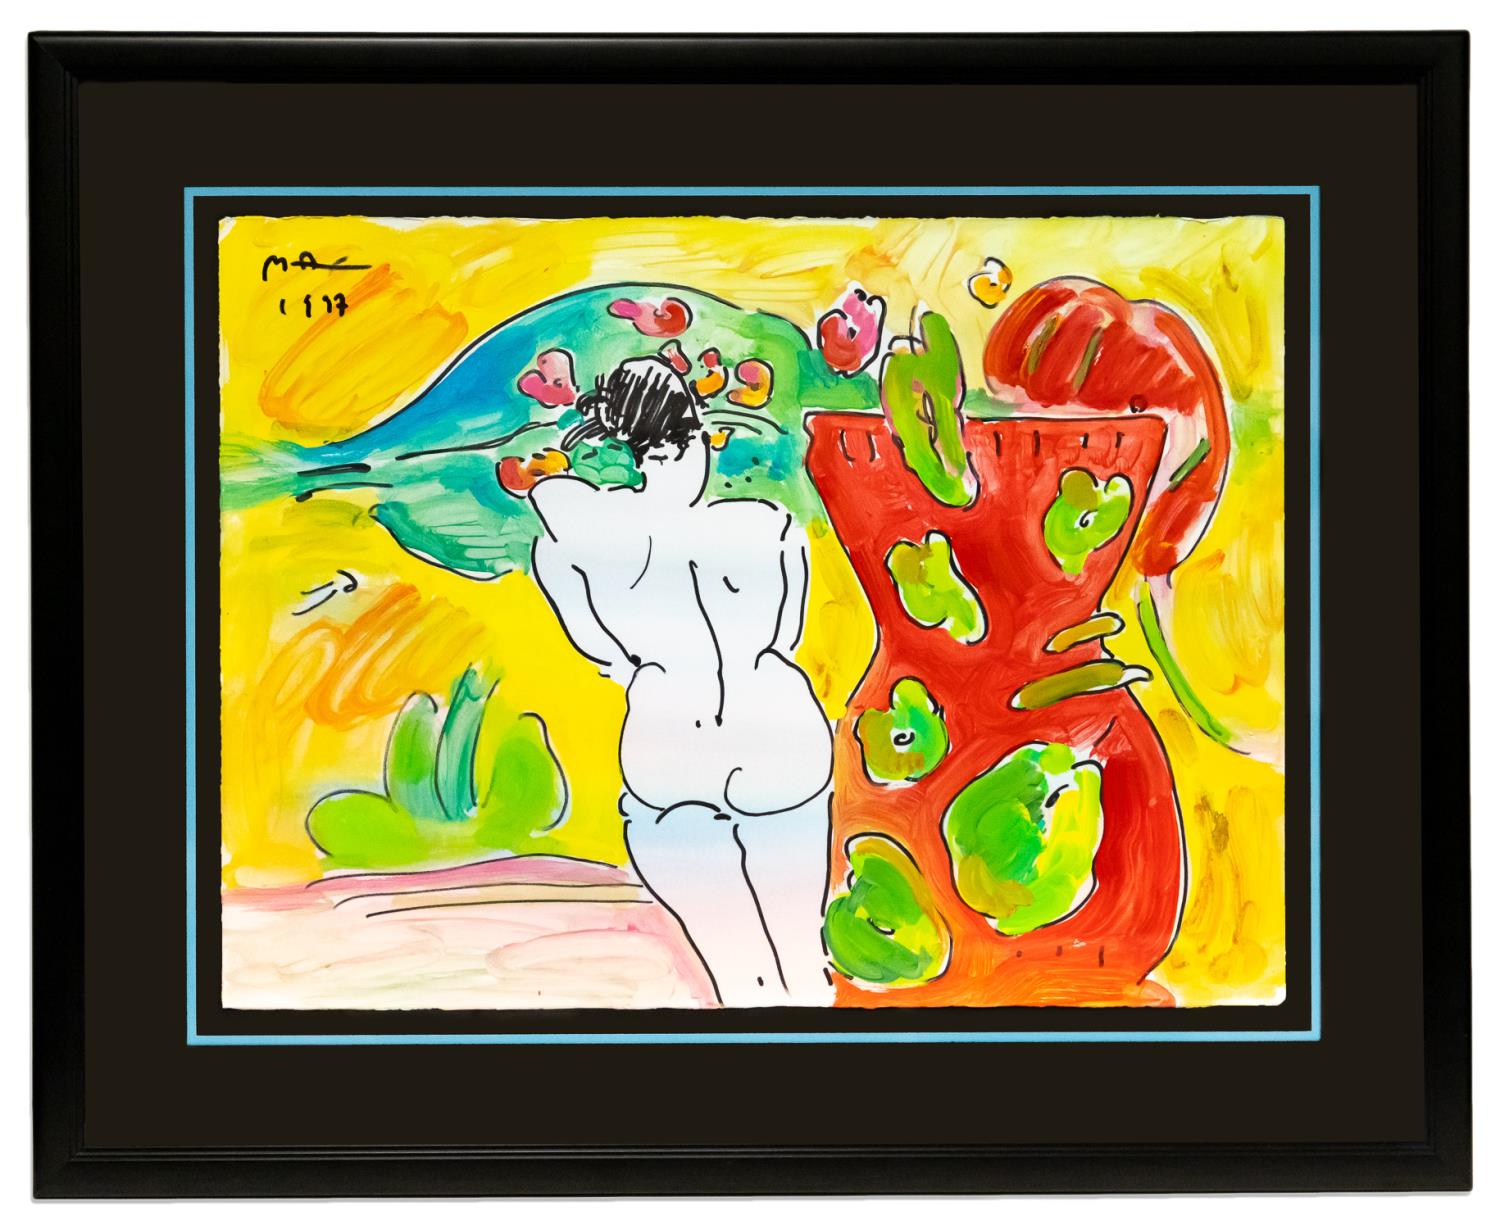 PETER MAX, "NUDE BY VASE" ACRYLIC